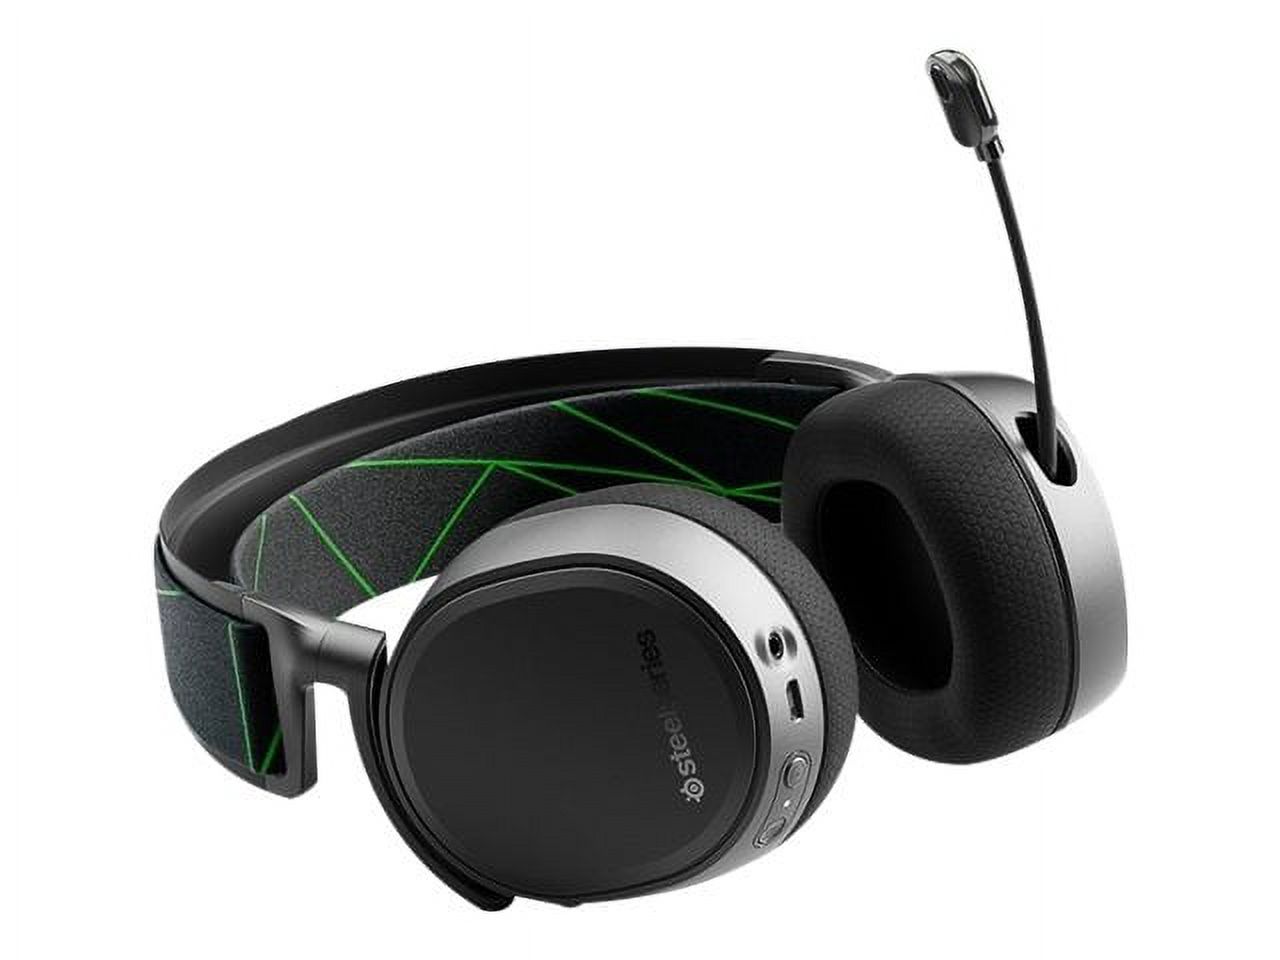 SteelSeries Arctis 9X Wireless Gaming Headset for Xbox - image 10 of 15